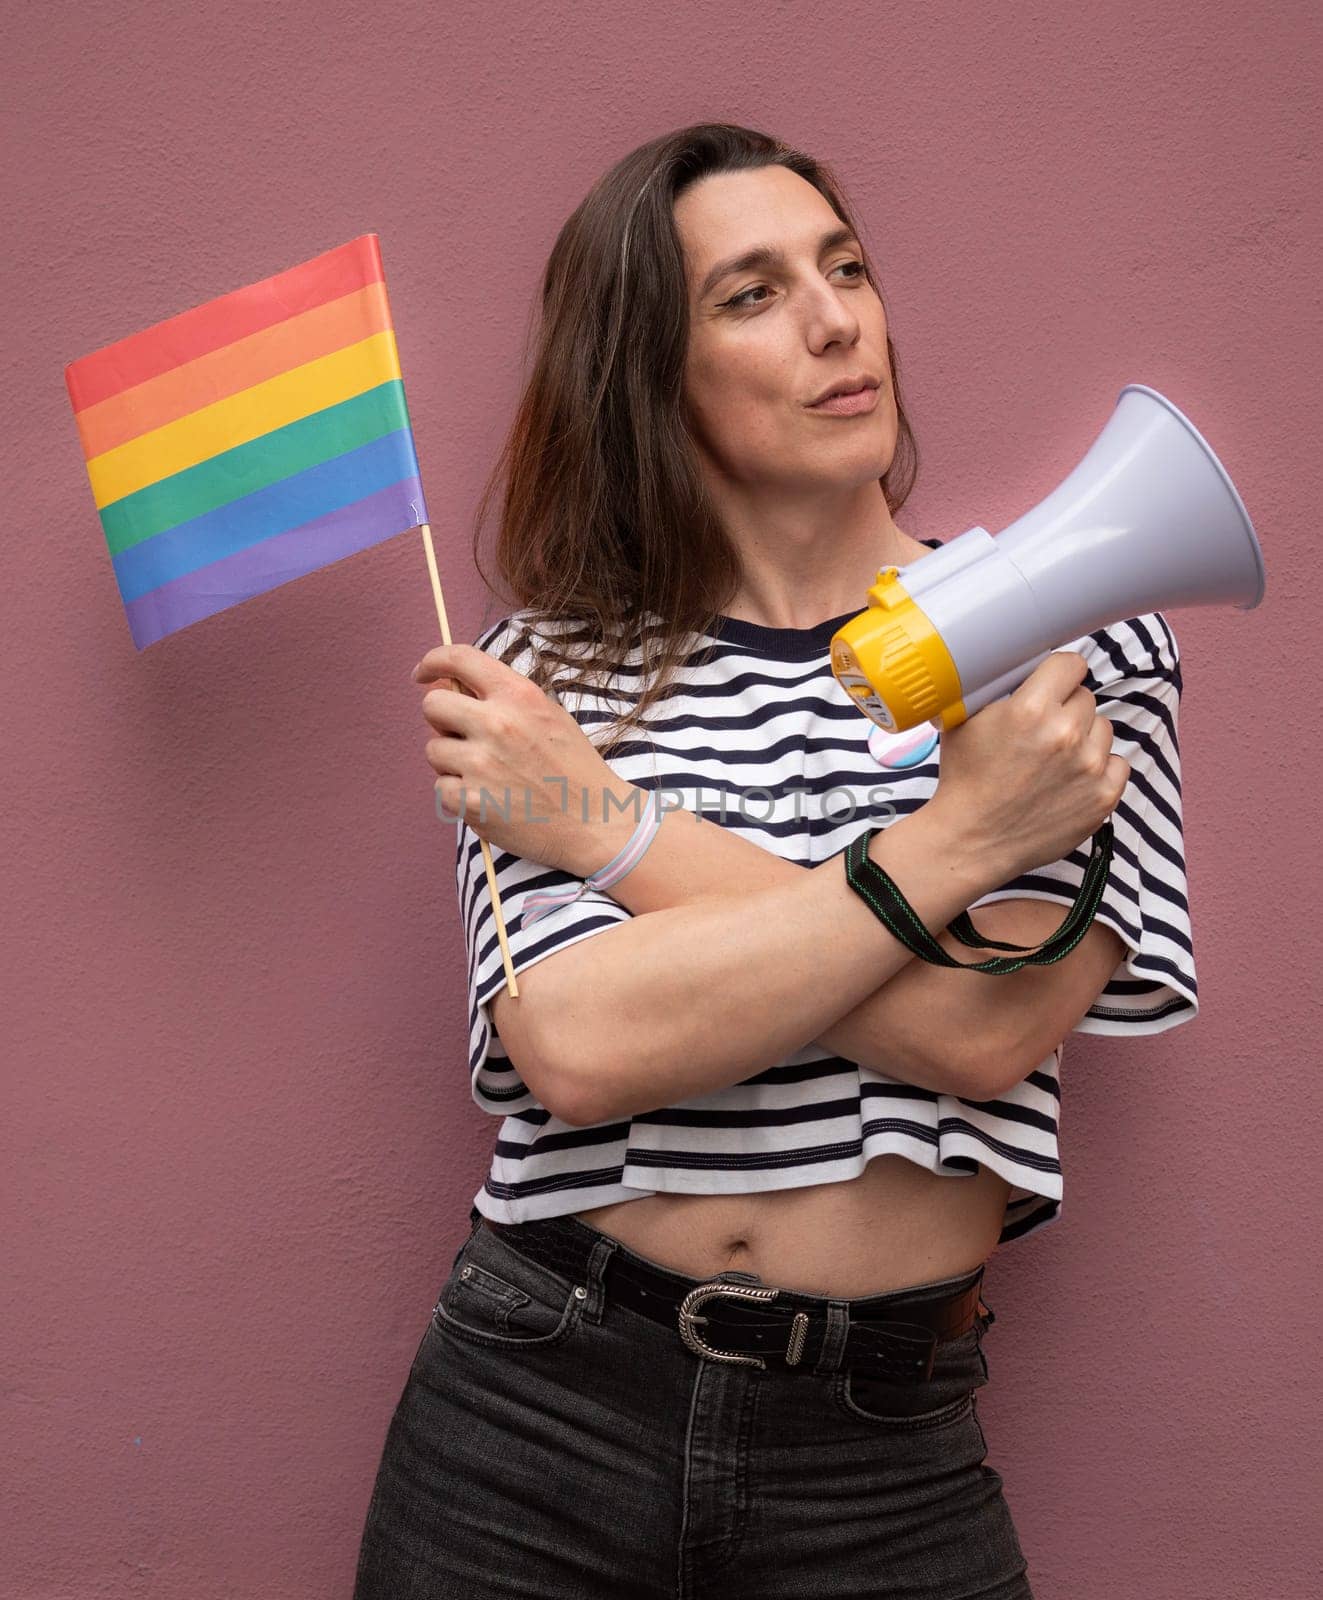 Transsexual woman looking away and holding a rainbow flag and a megaphone to support LGBTQ community as activist by papatonic